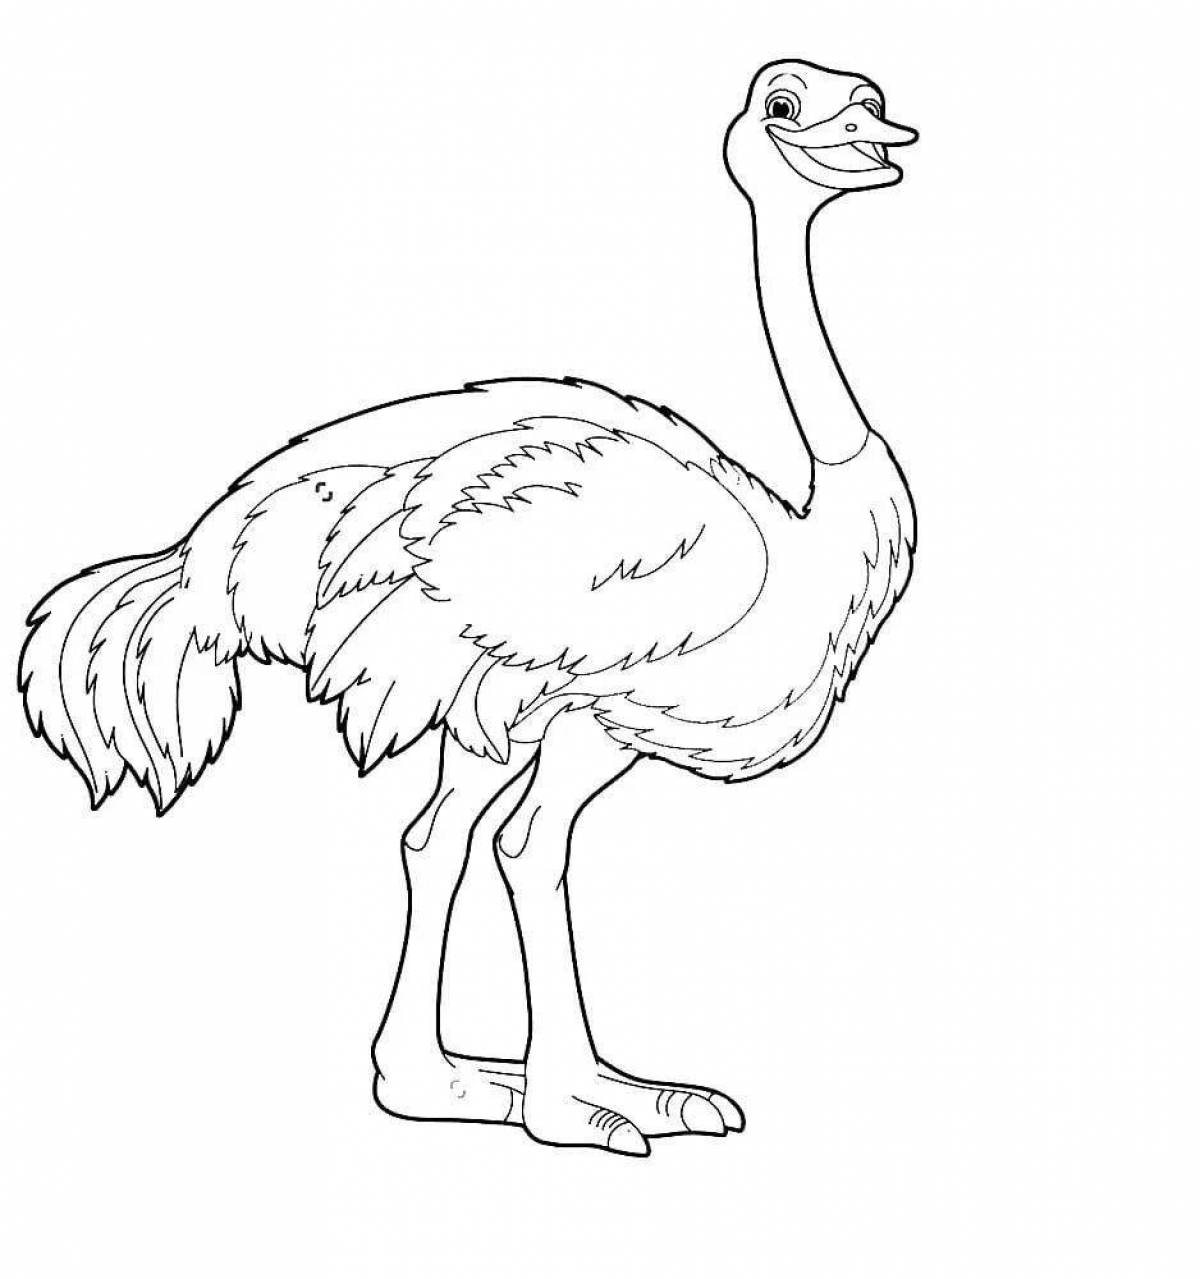 Coloring page of a sociable emu